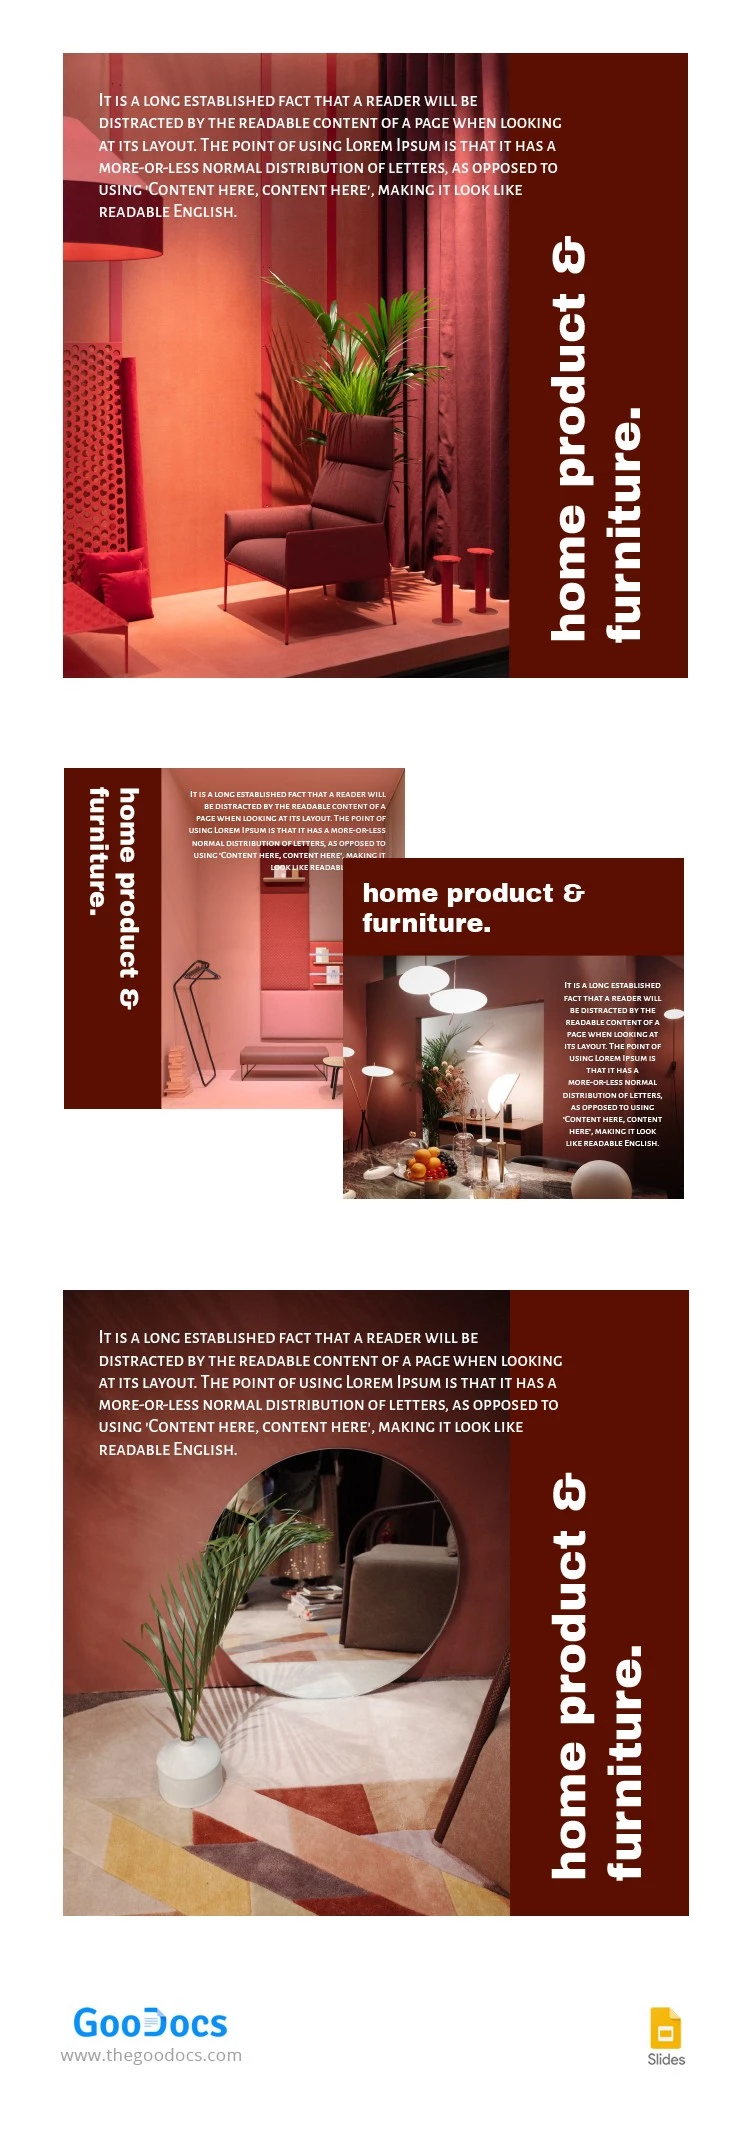 Red Home Furniture Amazon Product - free Google Docs Template - 10064277